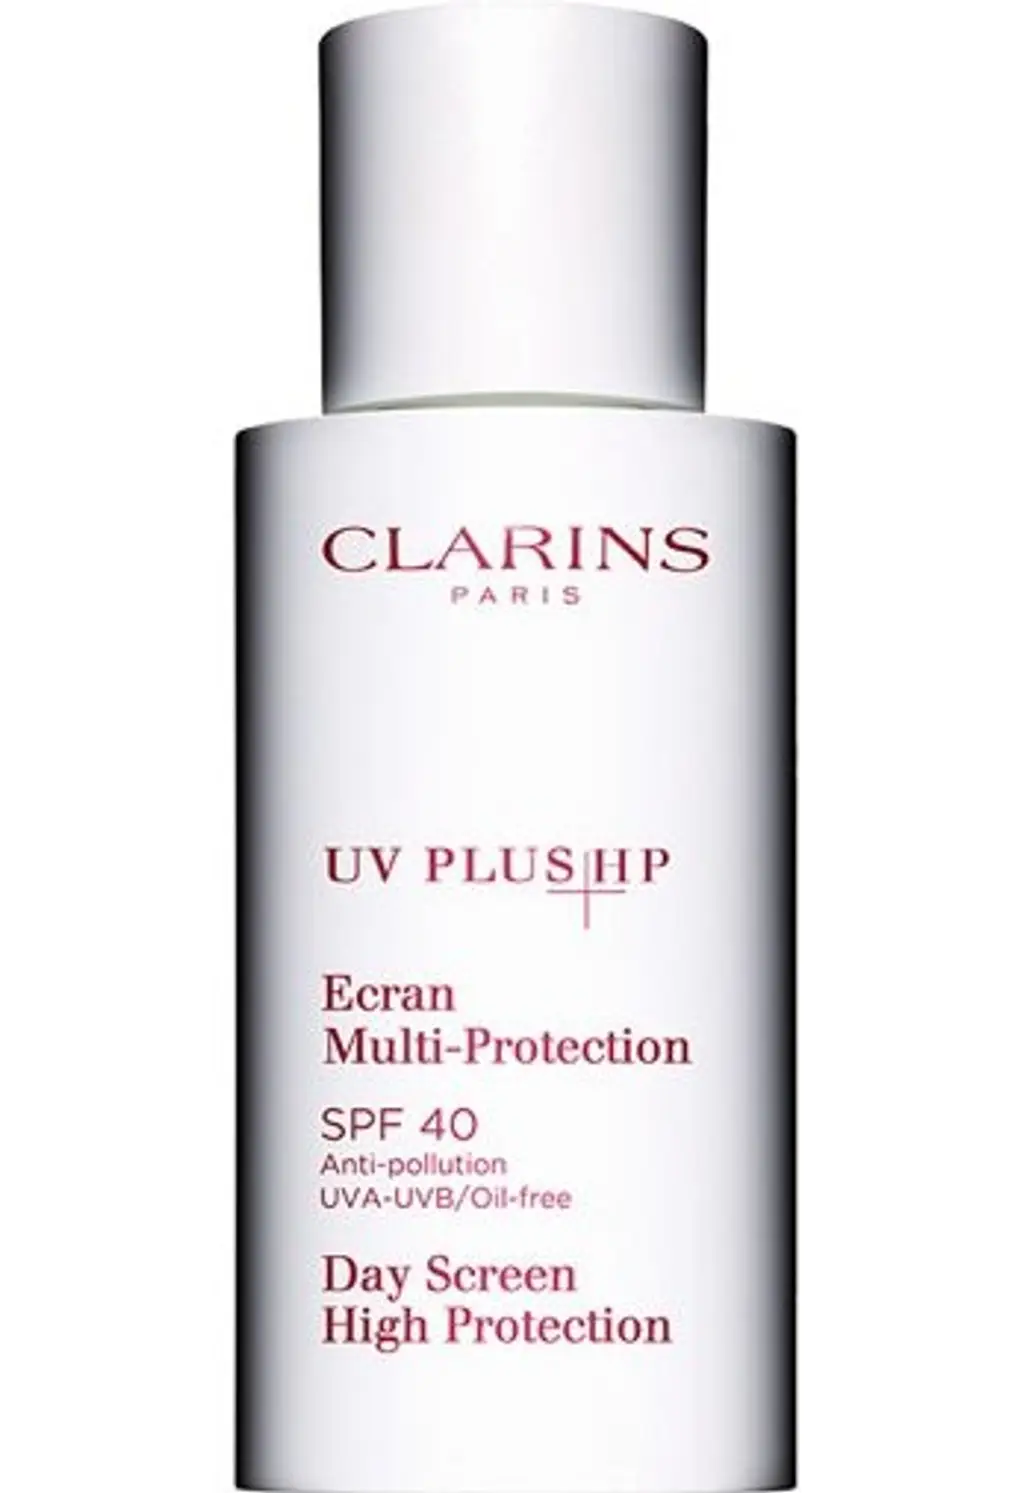 Clarins UV plus HP Day Screen High Protection SPF 40